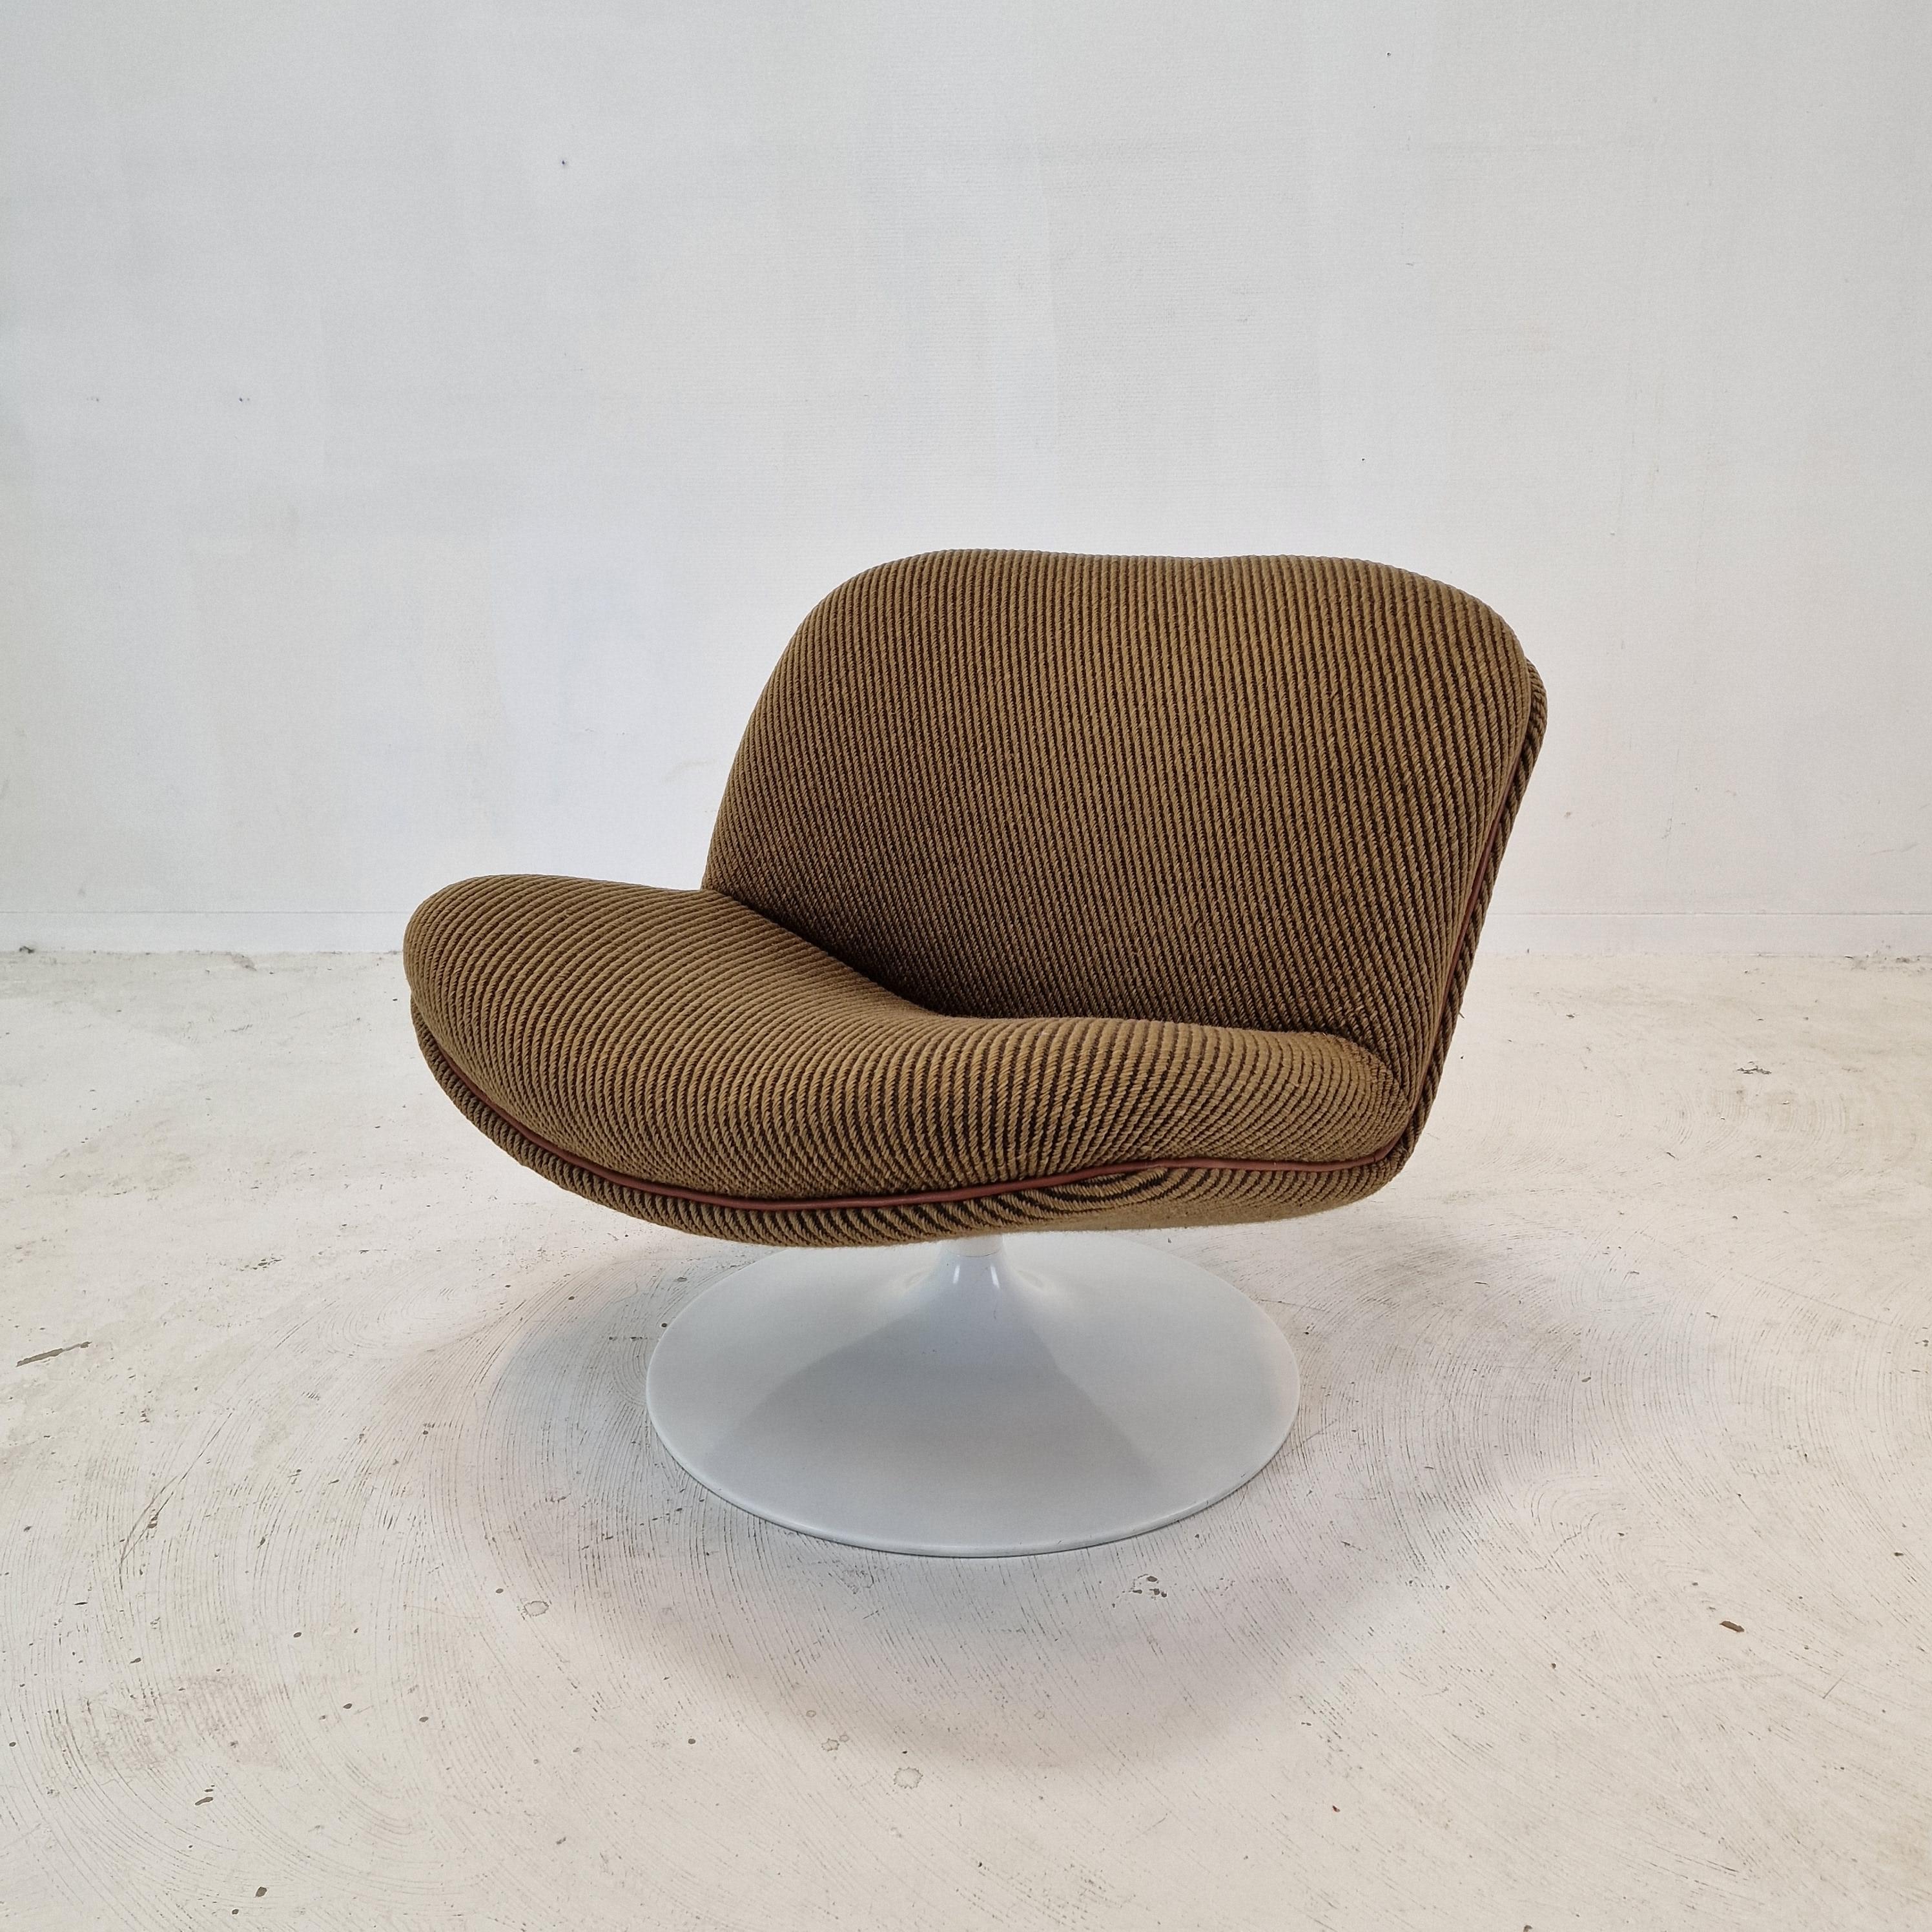 Very cute and comfortable 508 Lounge Chair designed by the famous Geoffrey Harcourt for Artifort in the 70's.

Very solid wooden frame with a large pivoting metal foot.  
The chair has the original high quality wool fabric, color brown. 
It has the